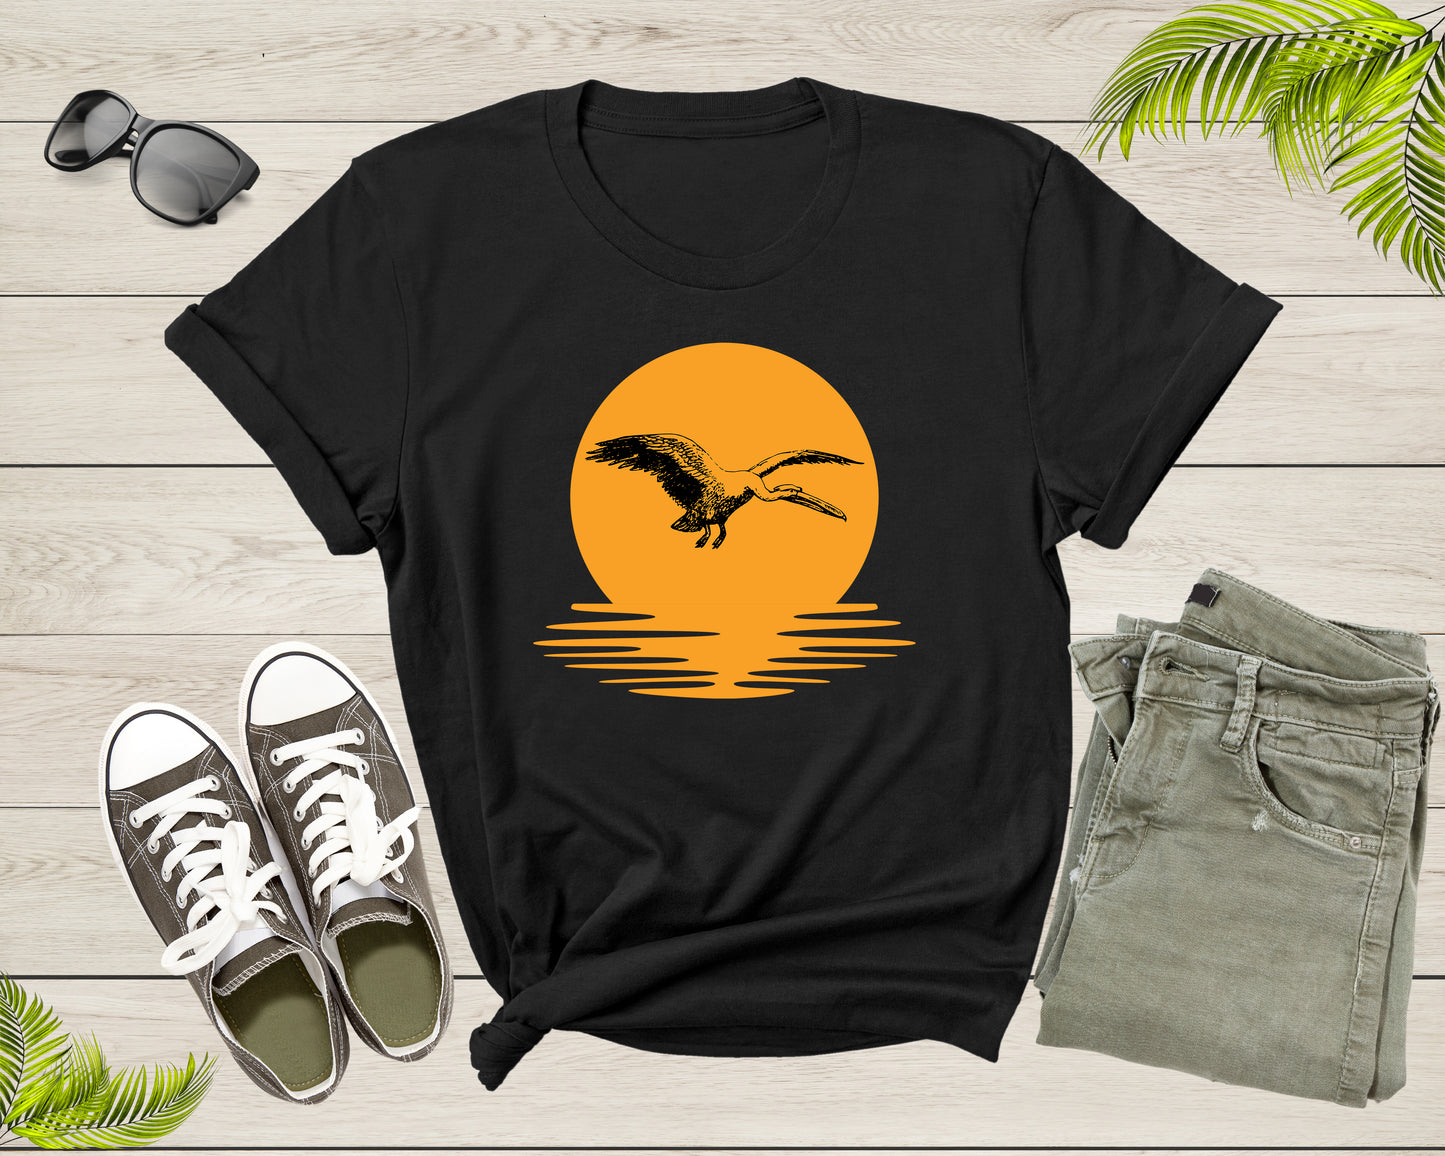 Flying Pelican Bird Animal Sunset Nature For Men Women Kids T-shirt Vintage Retro Pelican Print Shirt Outfit Youth Graphic Design Tshirt